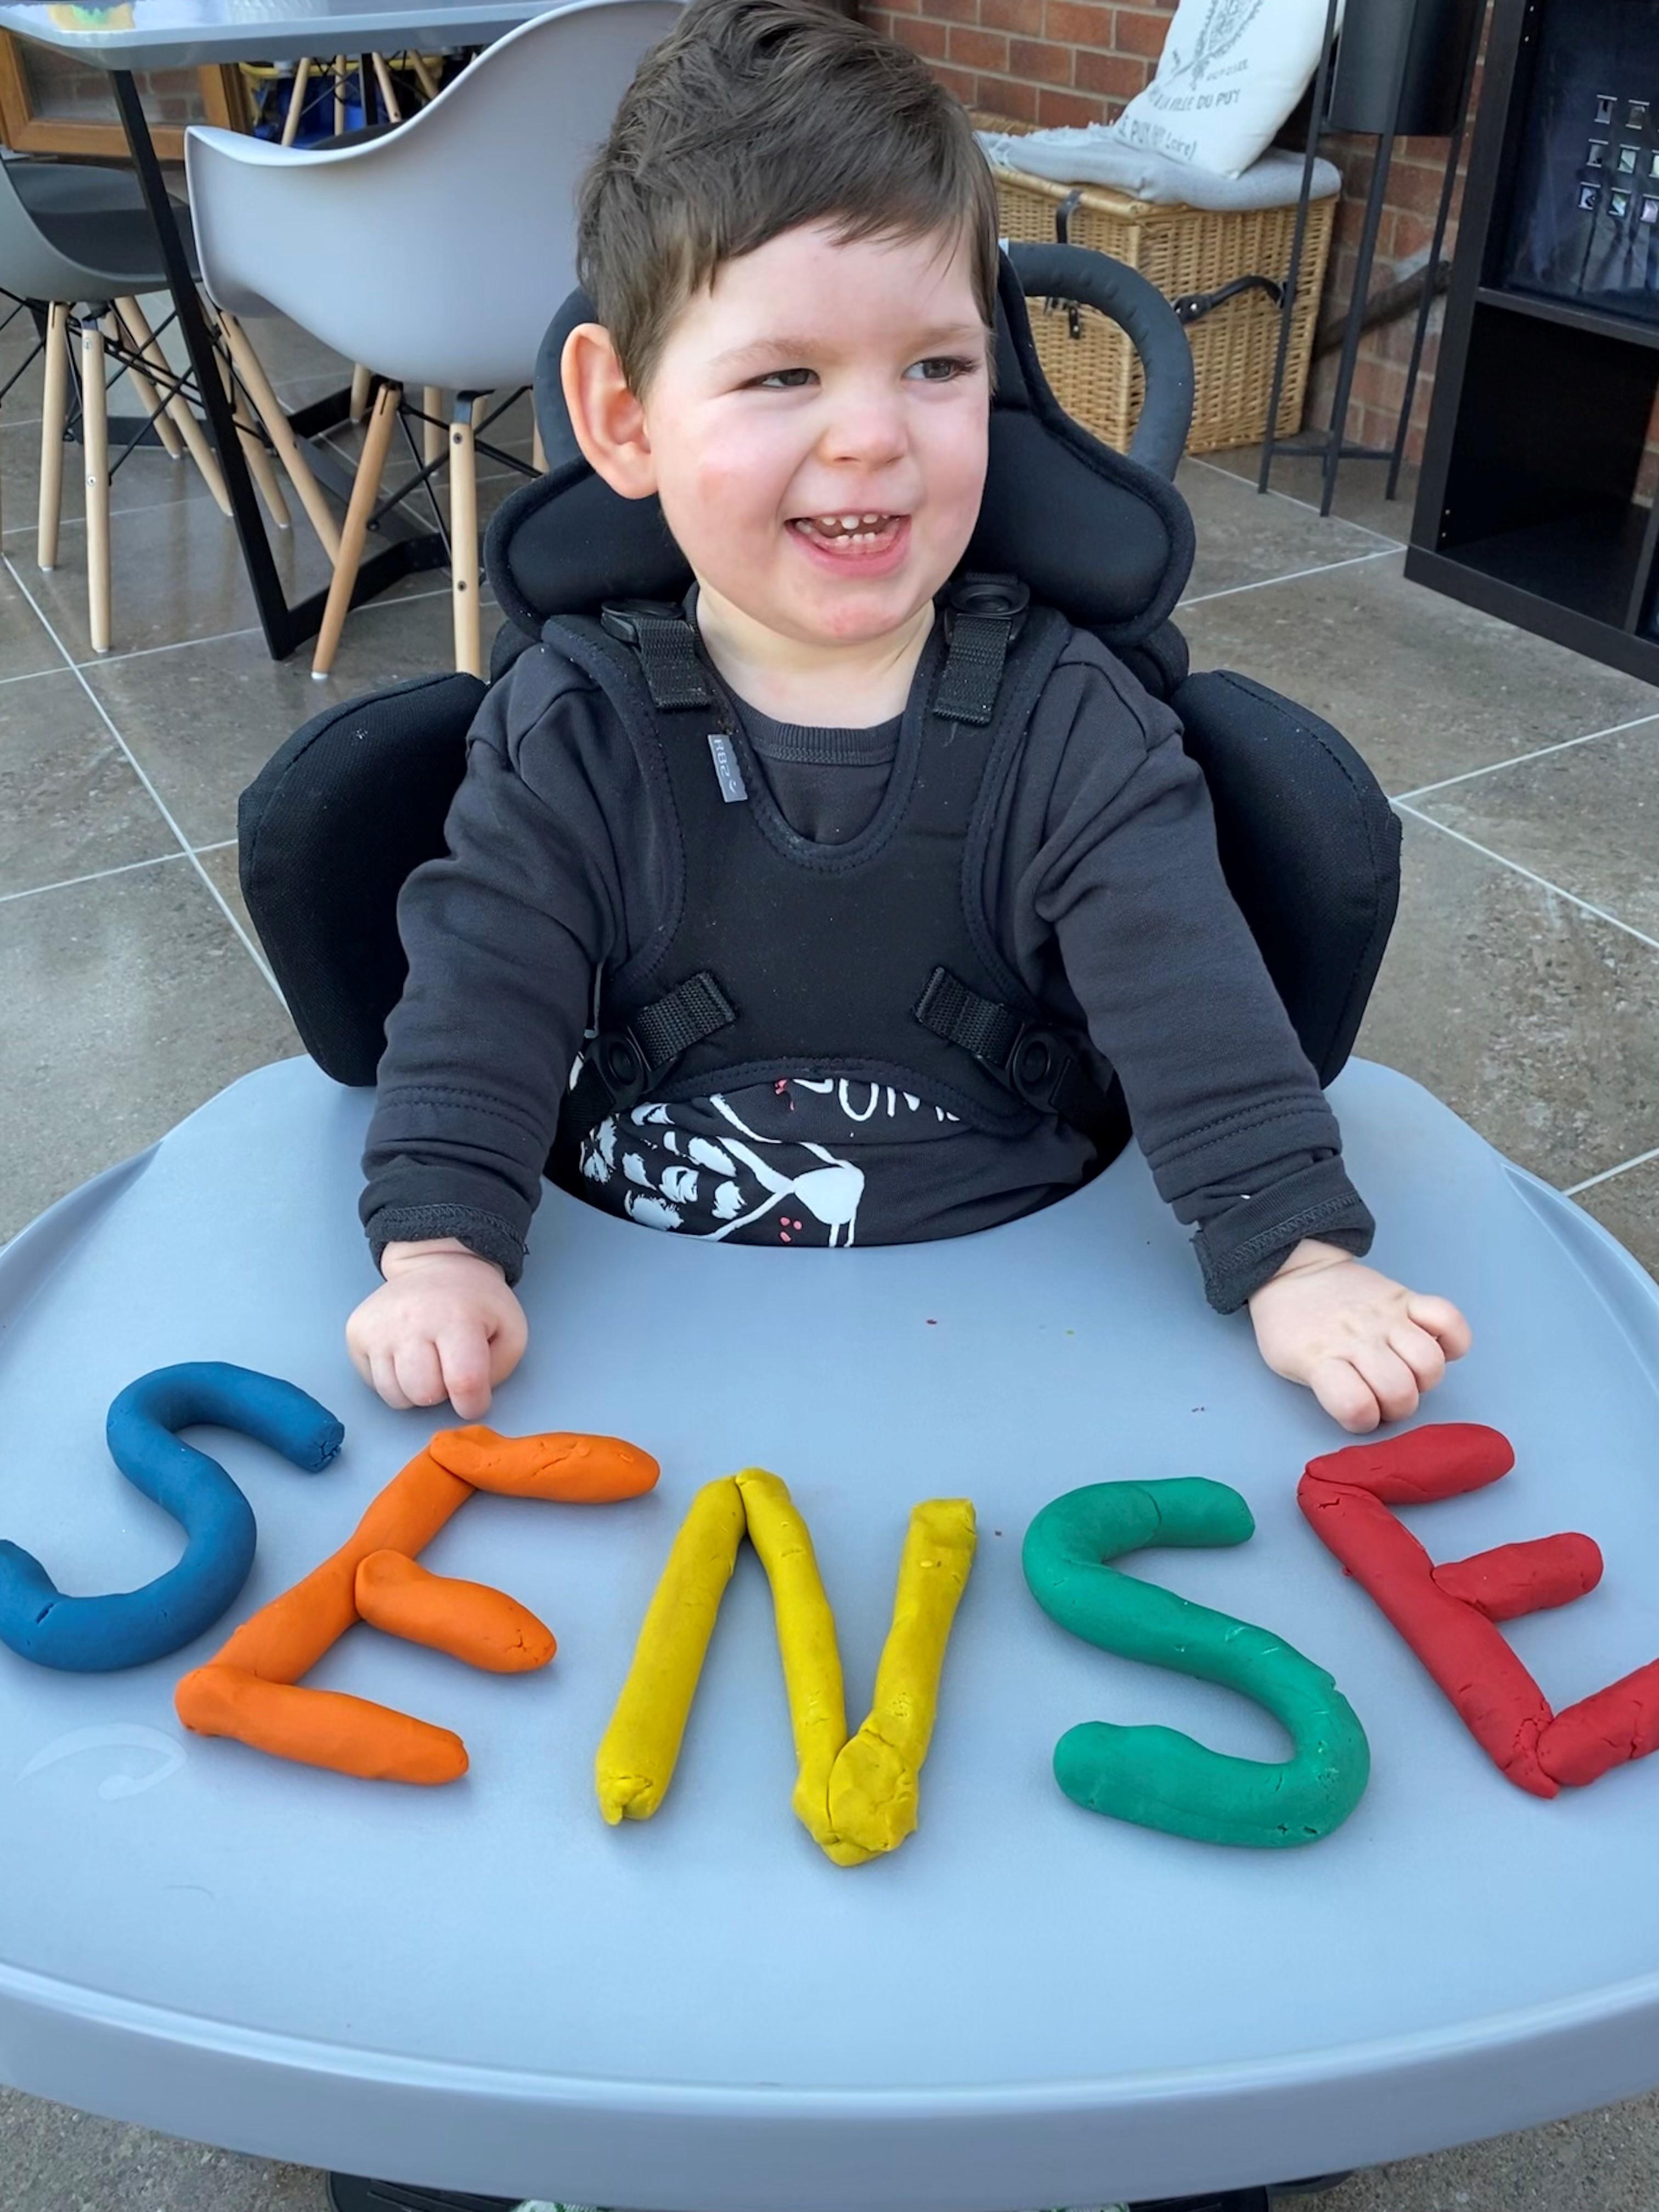 Charlie sitting in his chair with Sense spelt out in PlayDough